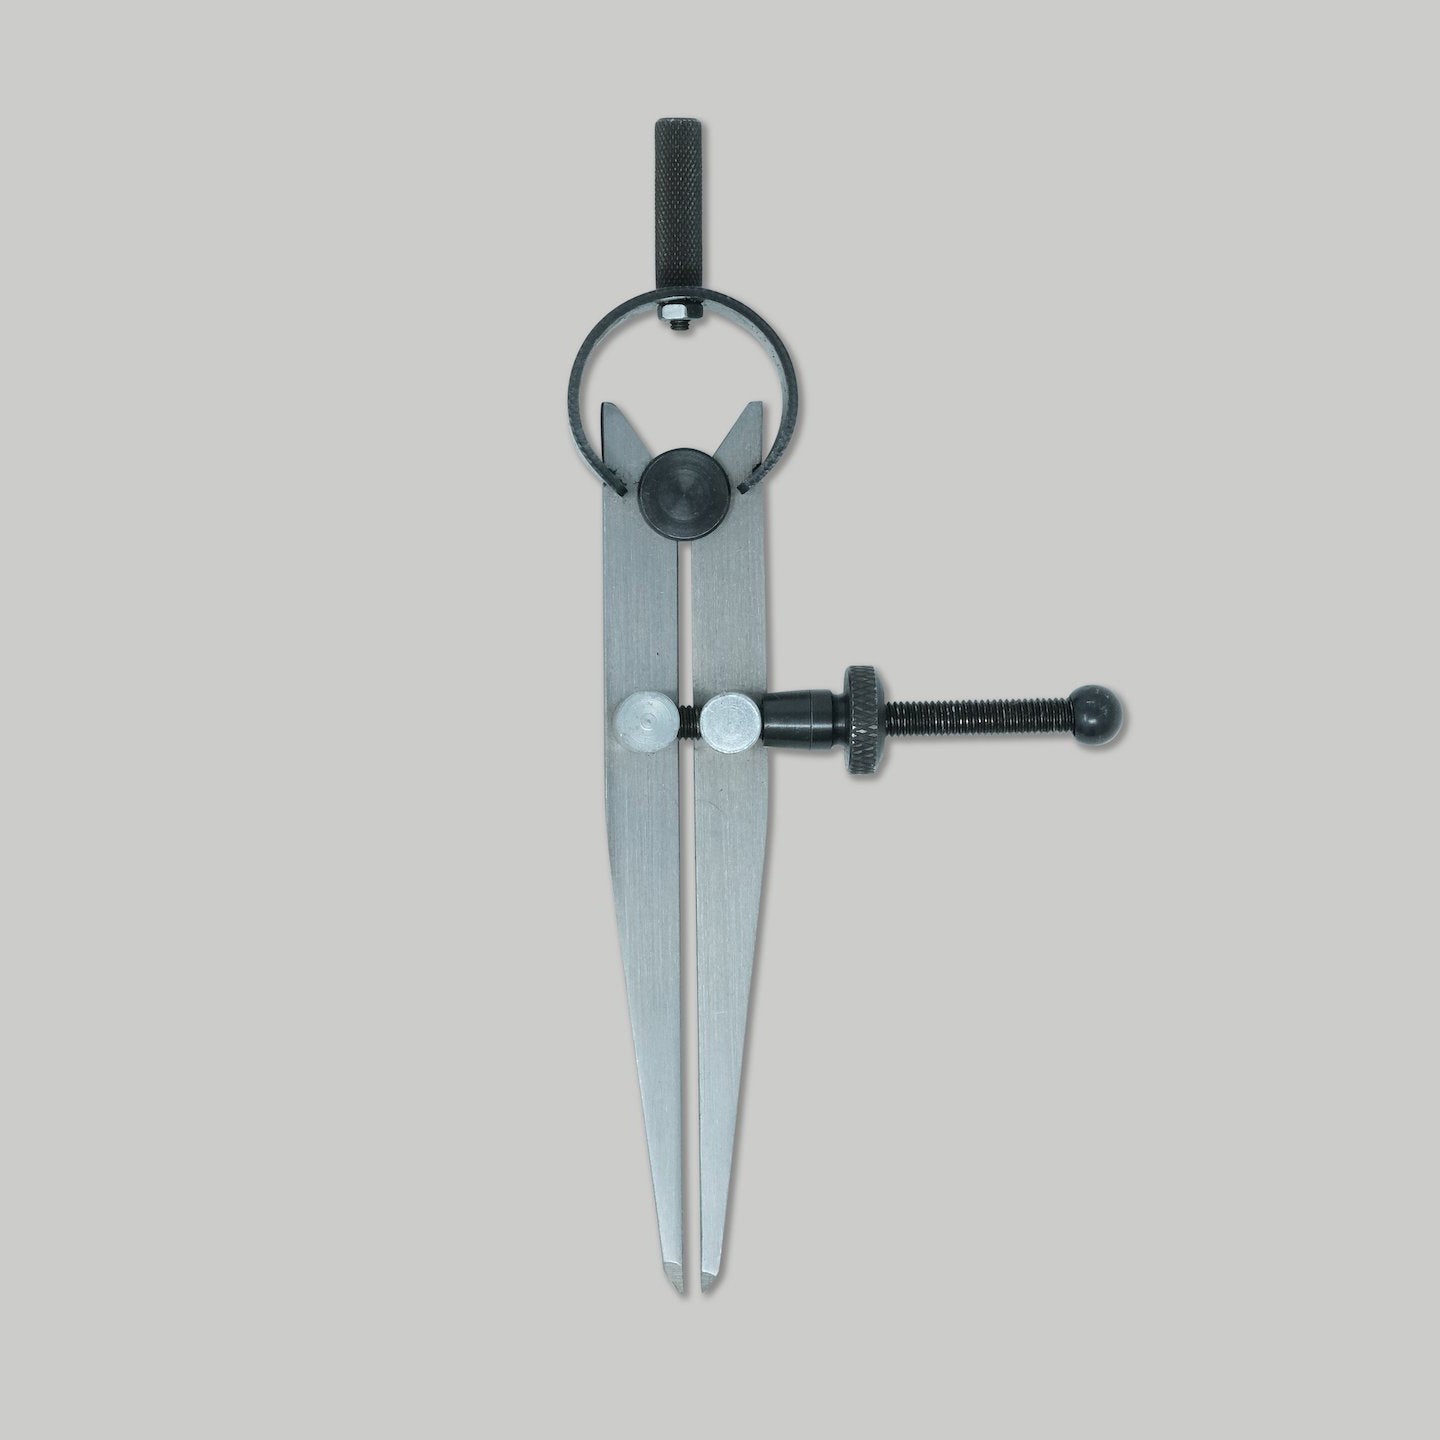 OWDEN Adjustable Wing Divider / Compass